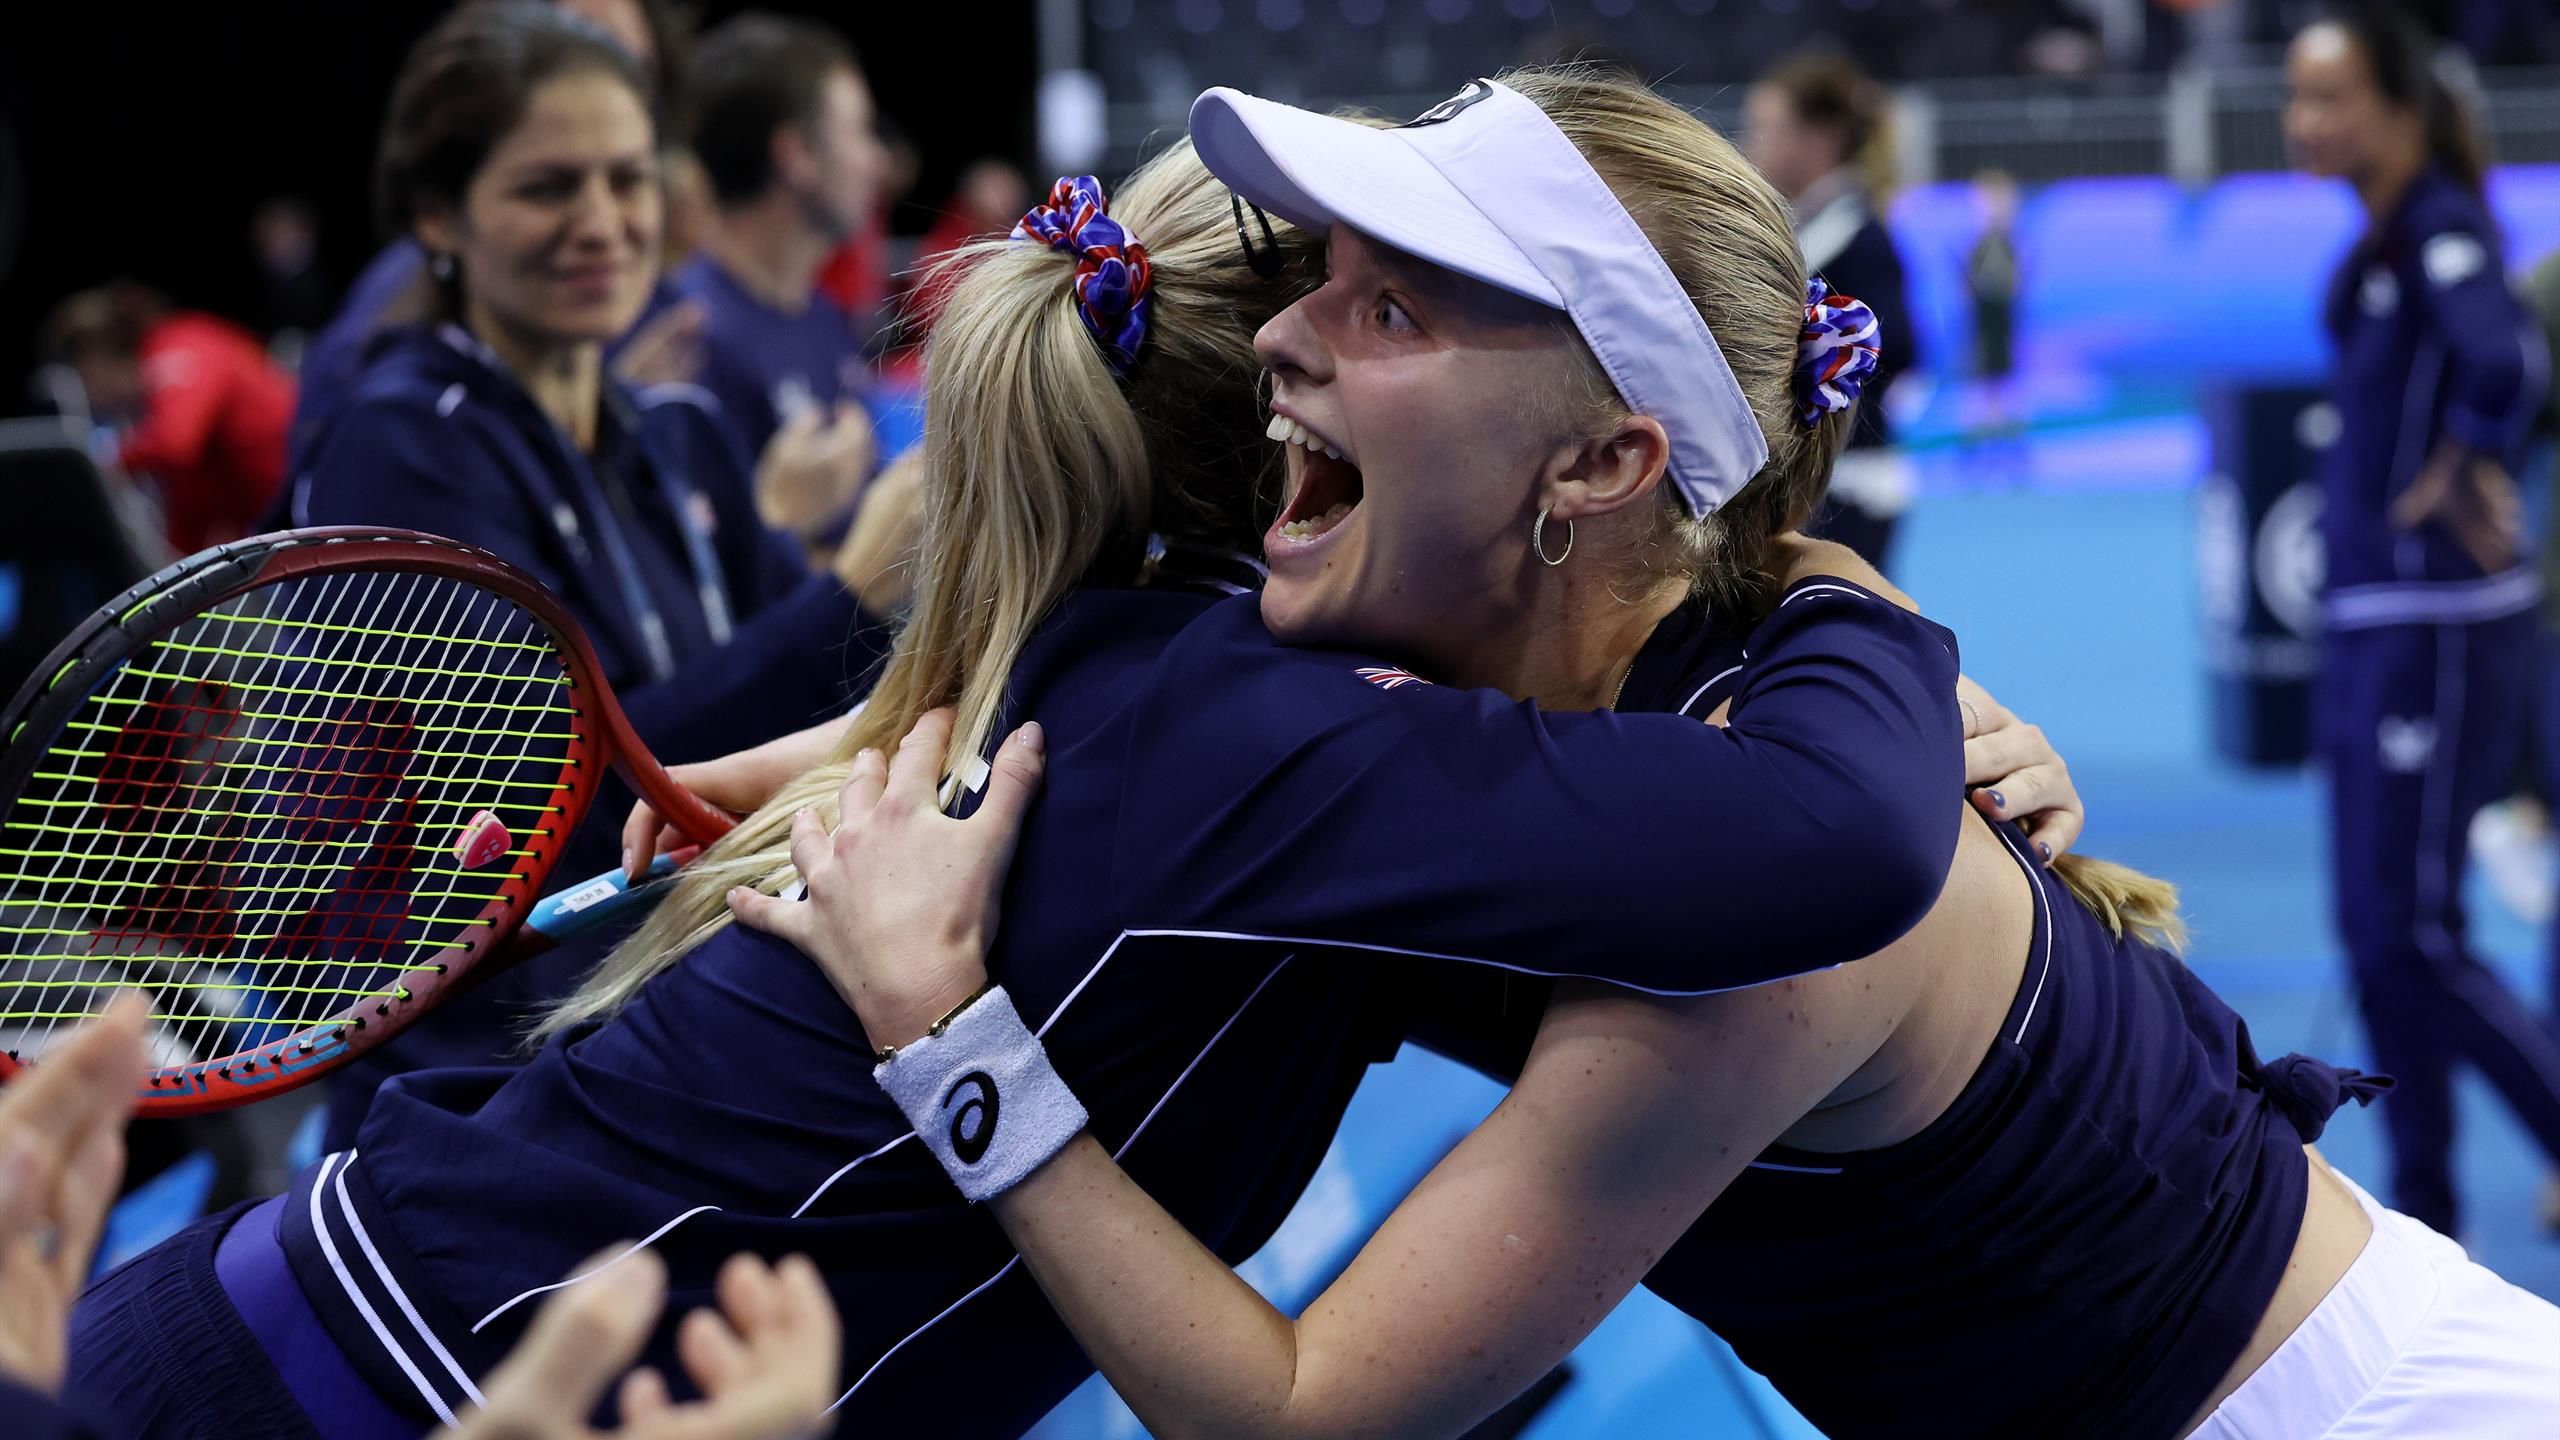 Billie Jean King Cup Great Britain progress to semi-finals for first time since 1981 after stunning Spain win